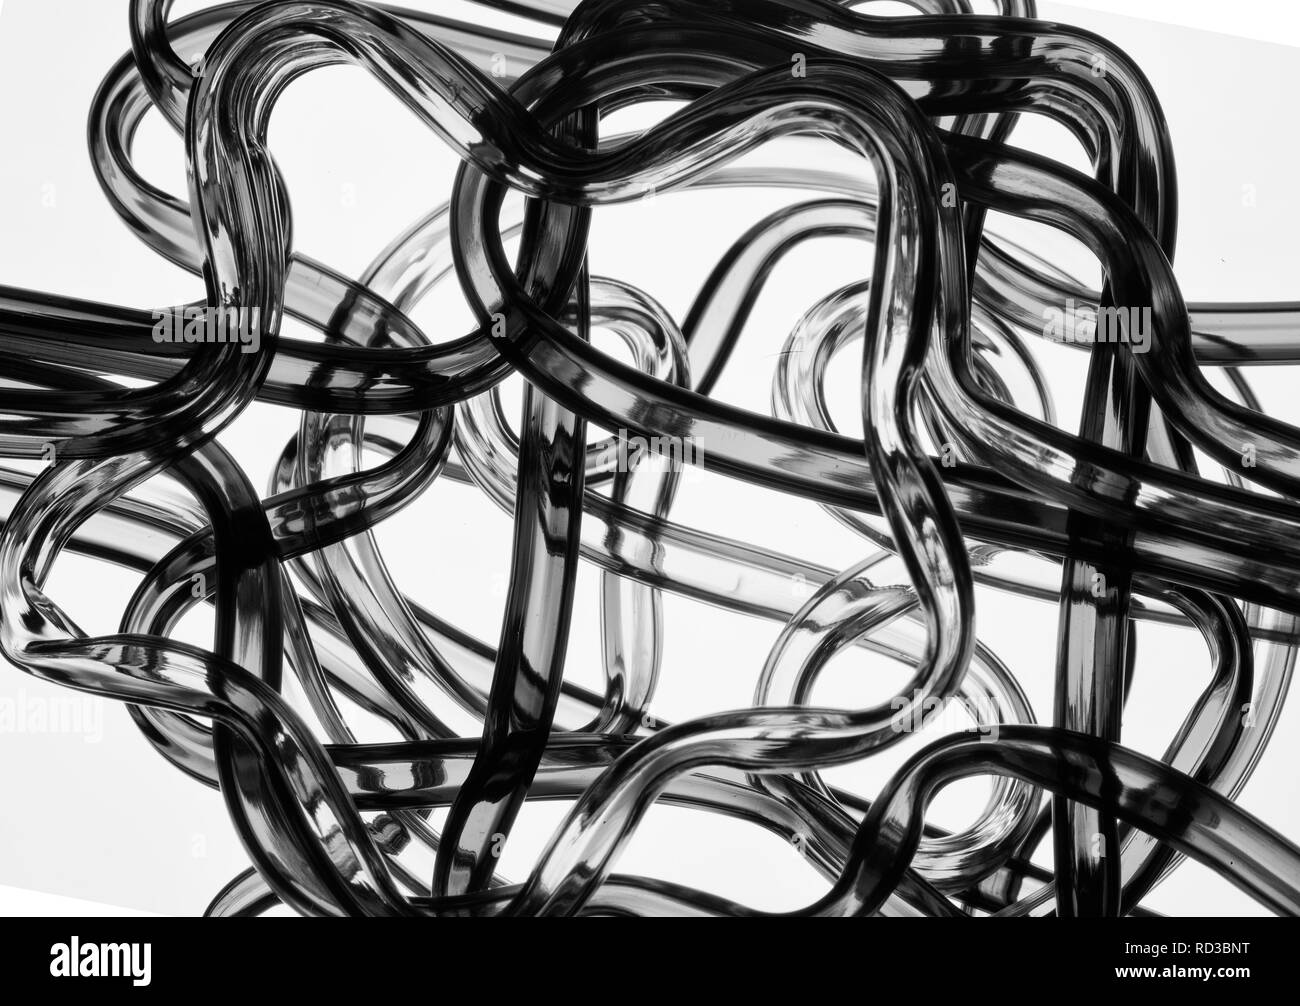 Black and white image of transparent tubes Stock Photo